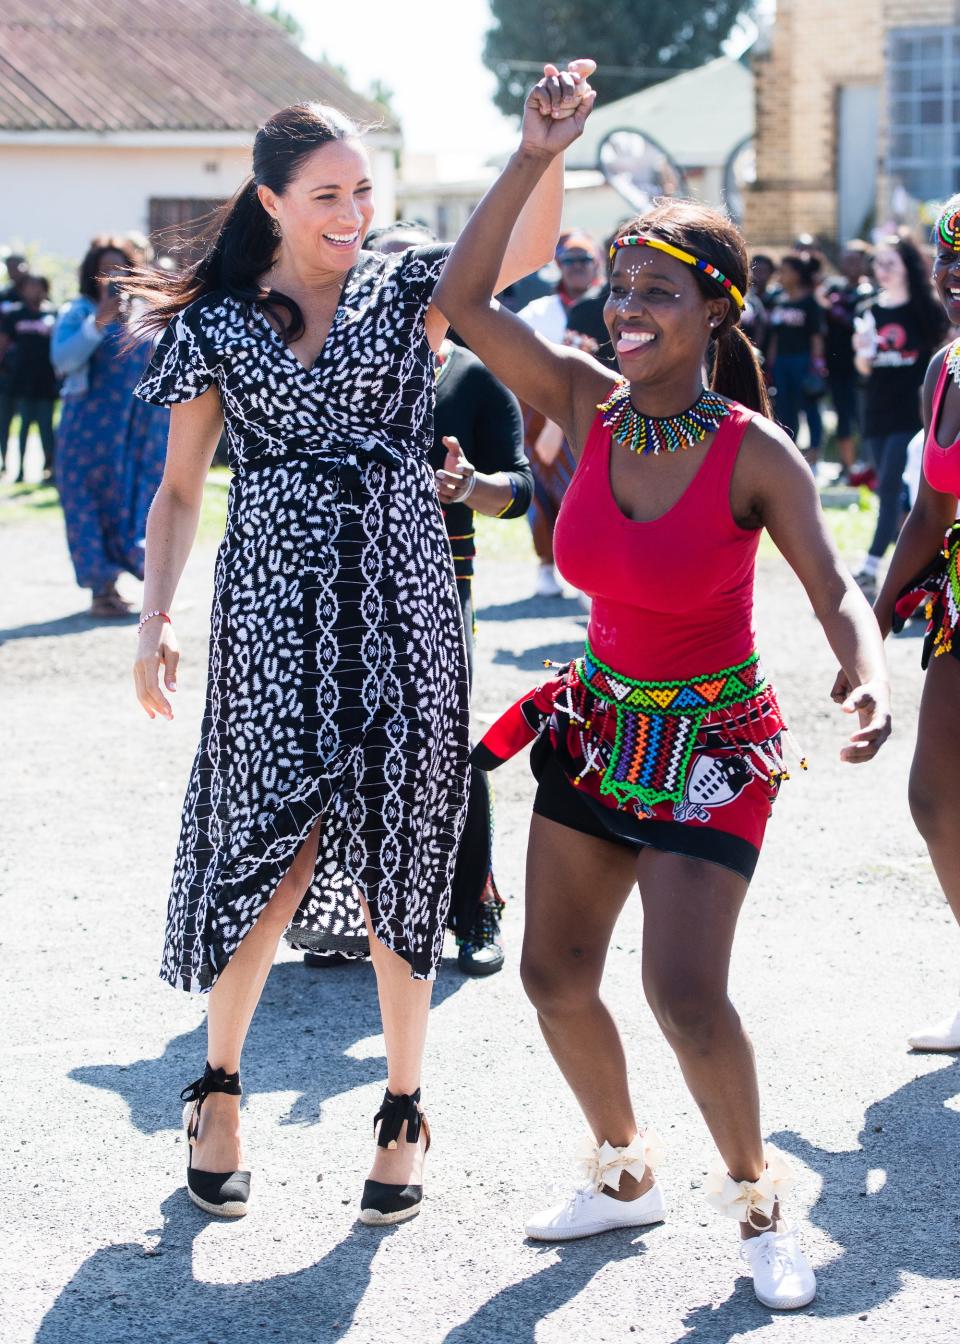 Meghan Markle dances in South Africa.